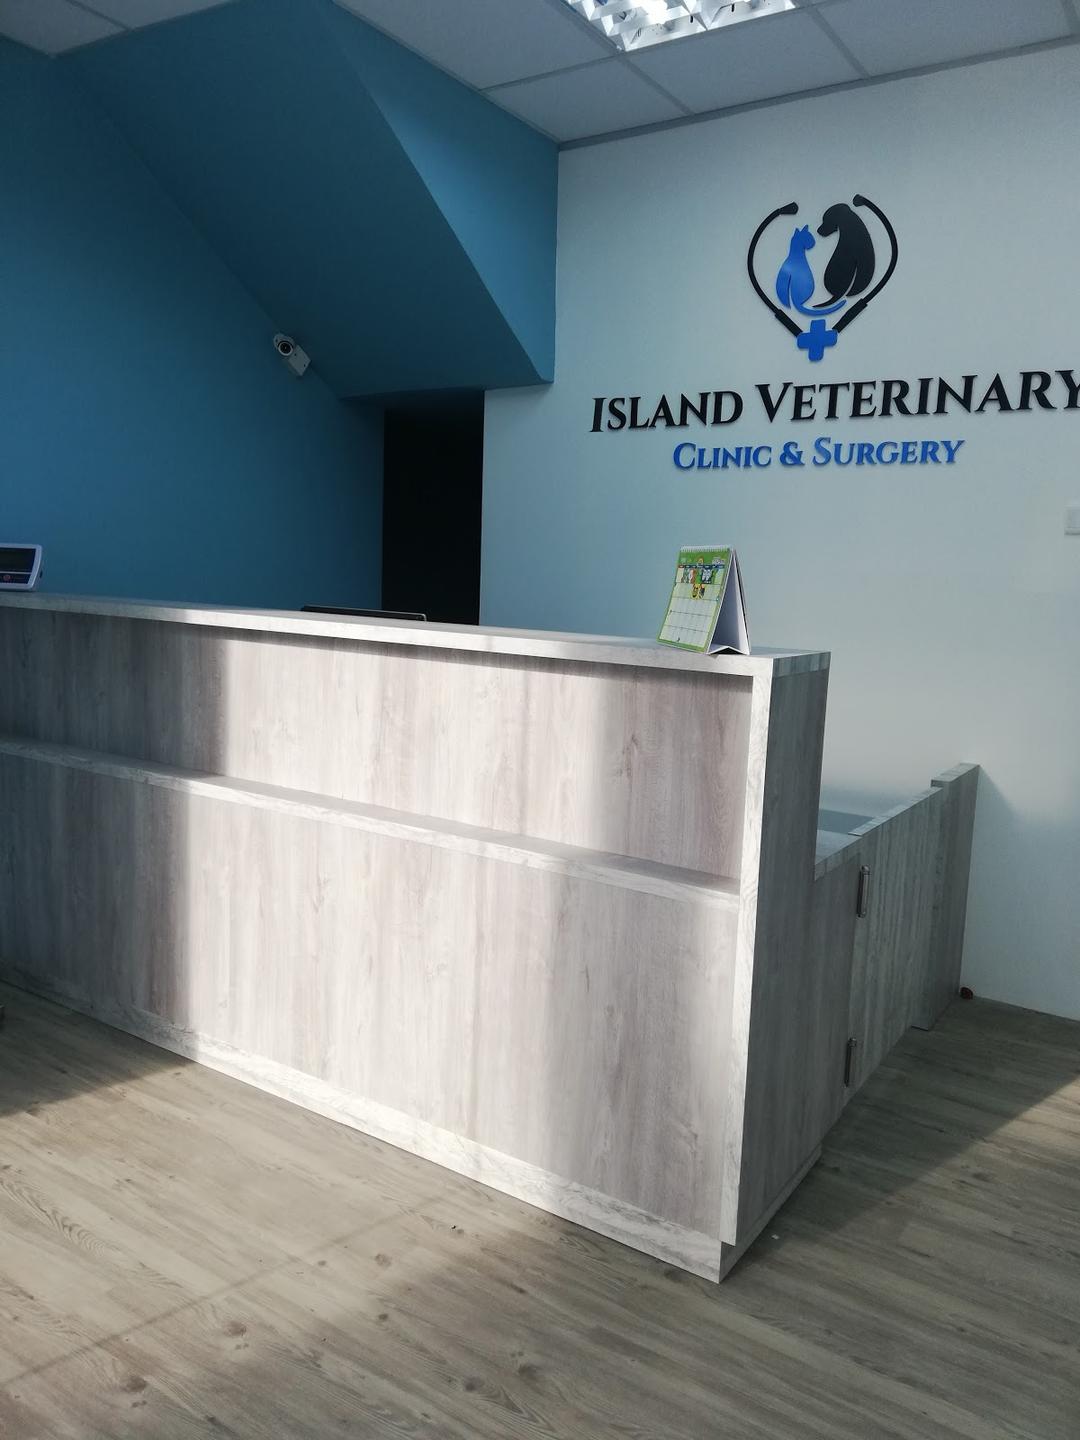 Photo of Island Veterinary Clinic and Surgery - George Town, Penang, Malaysia